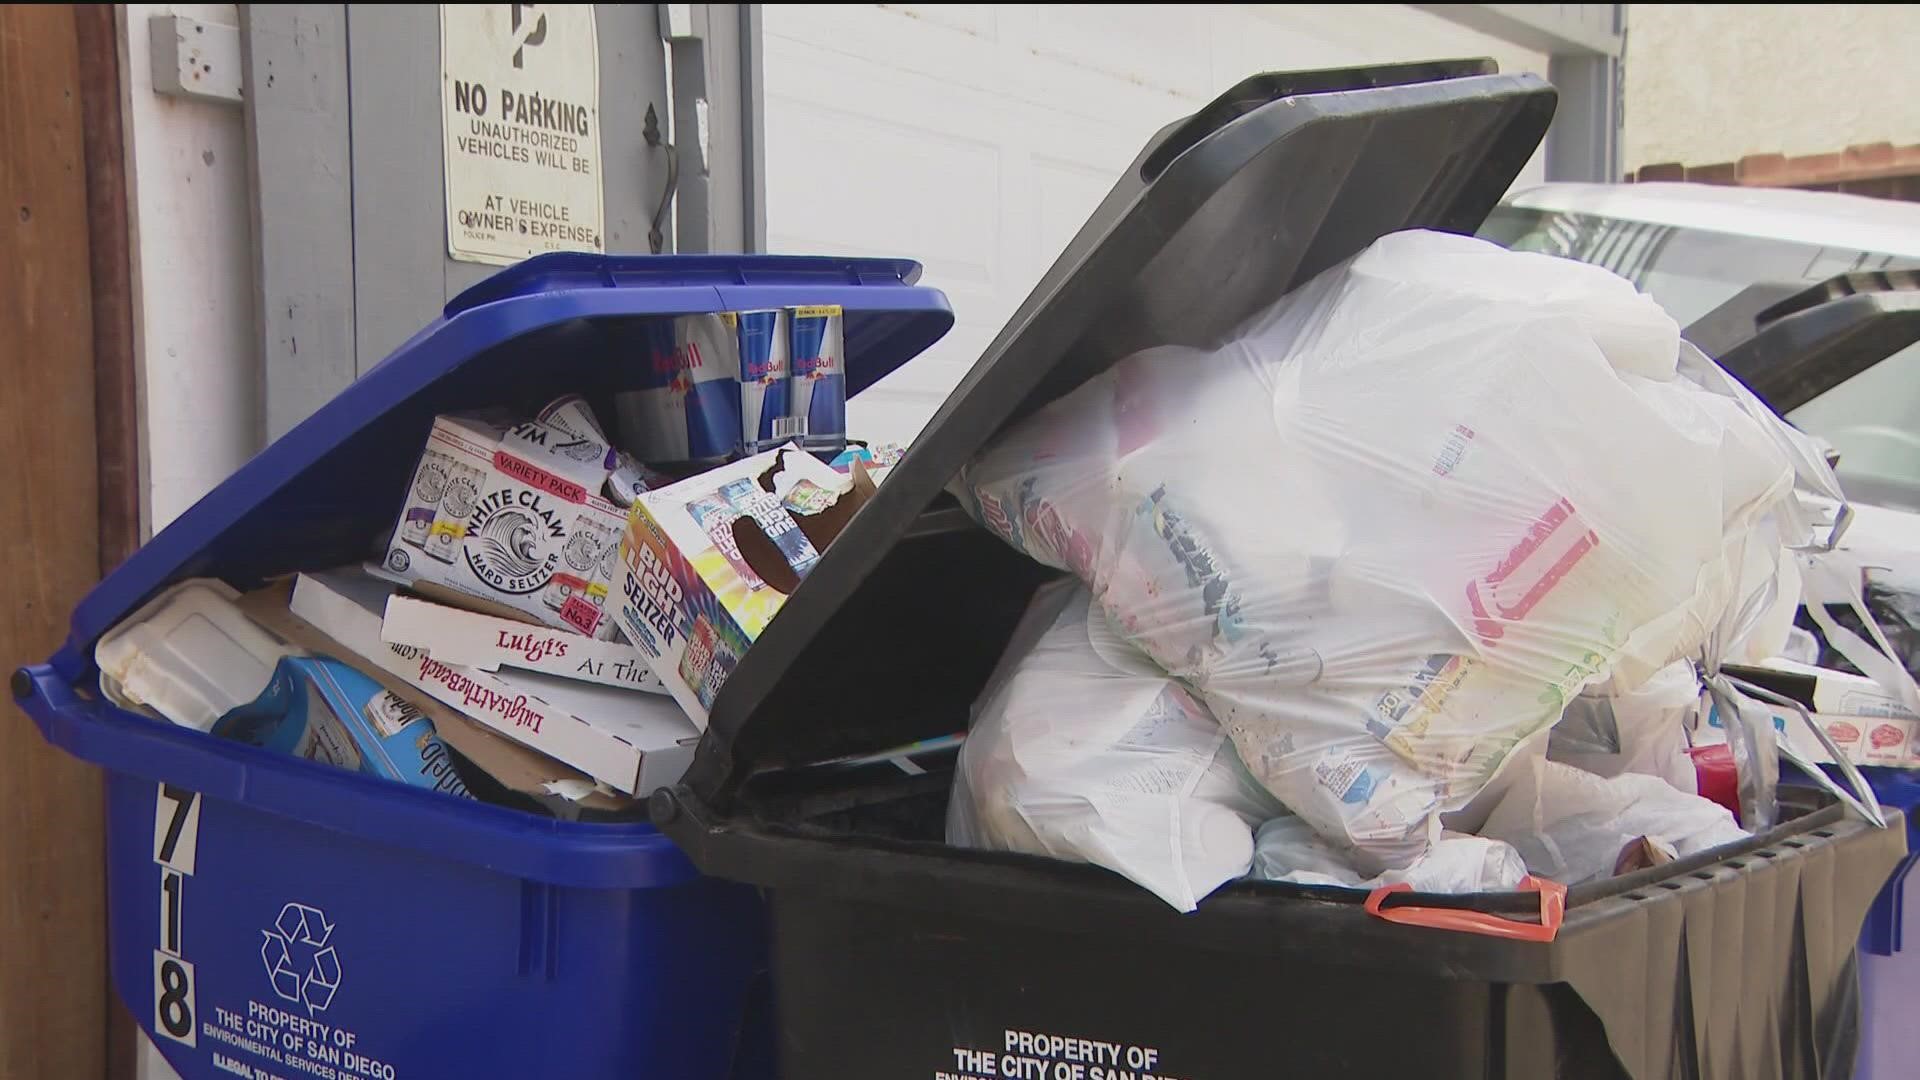 Should San Diego's current trashservice law be changed?